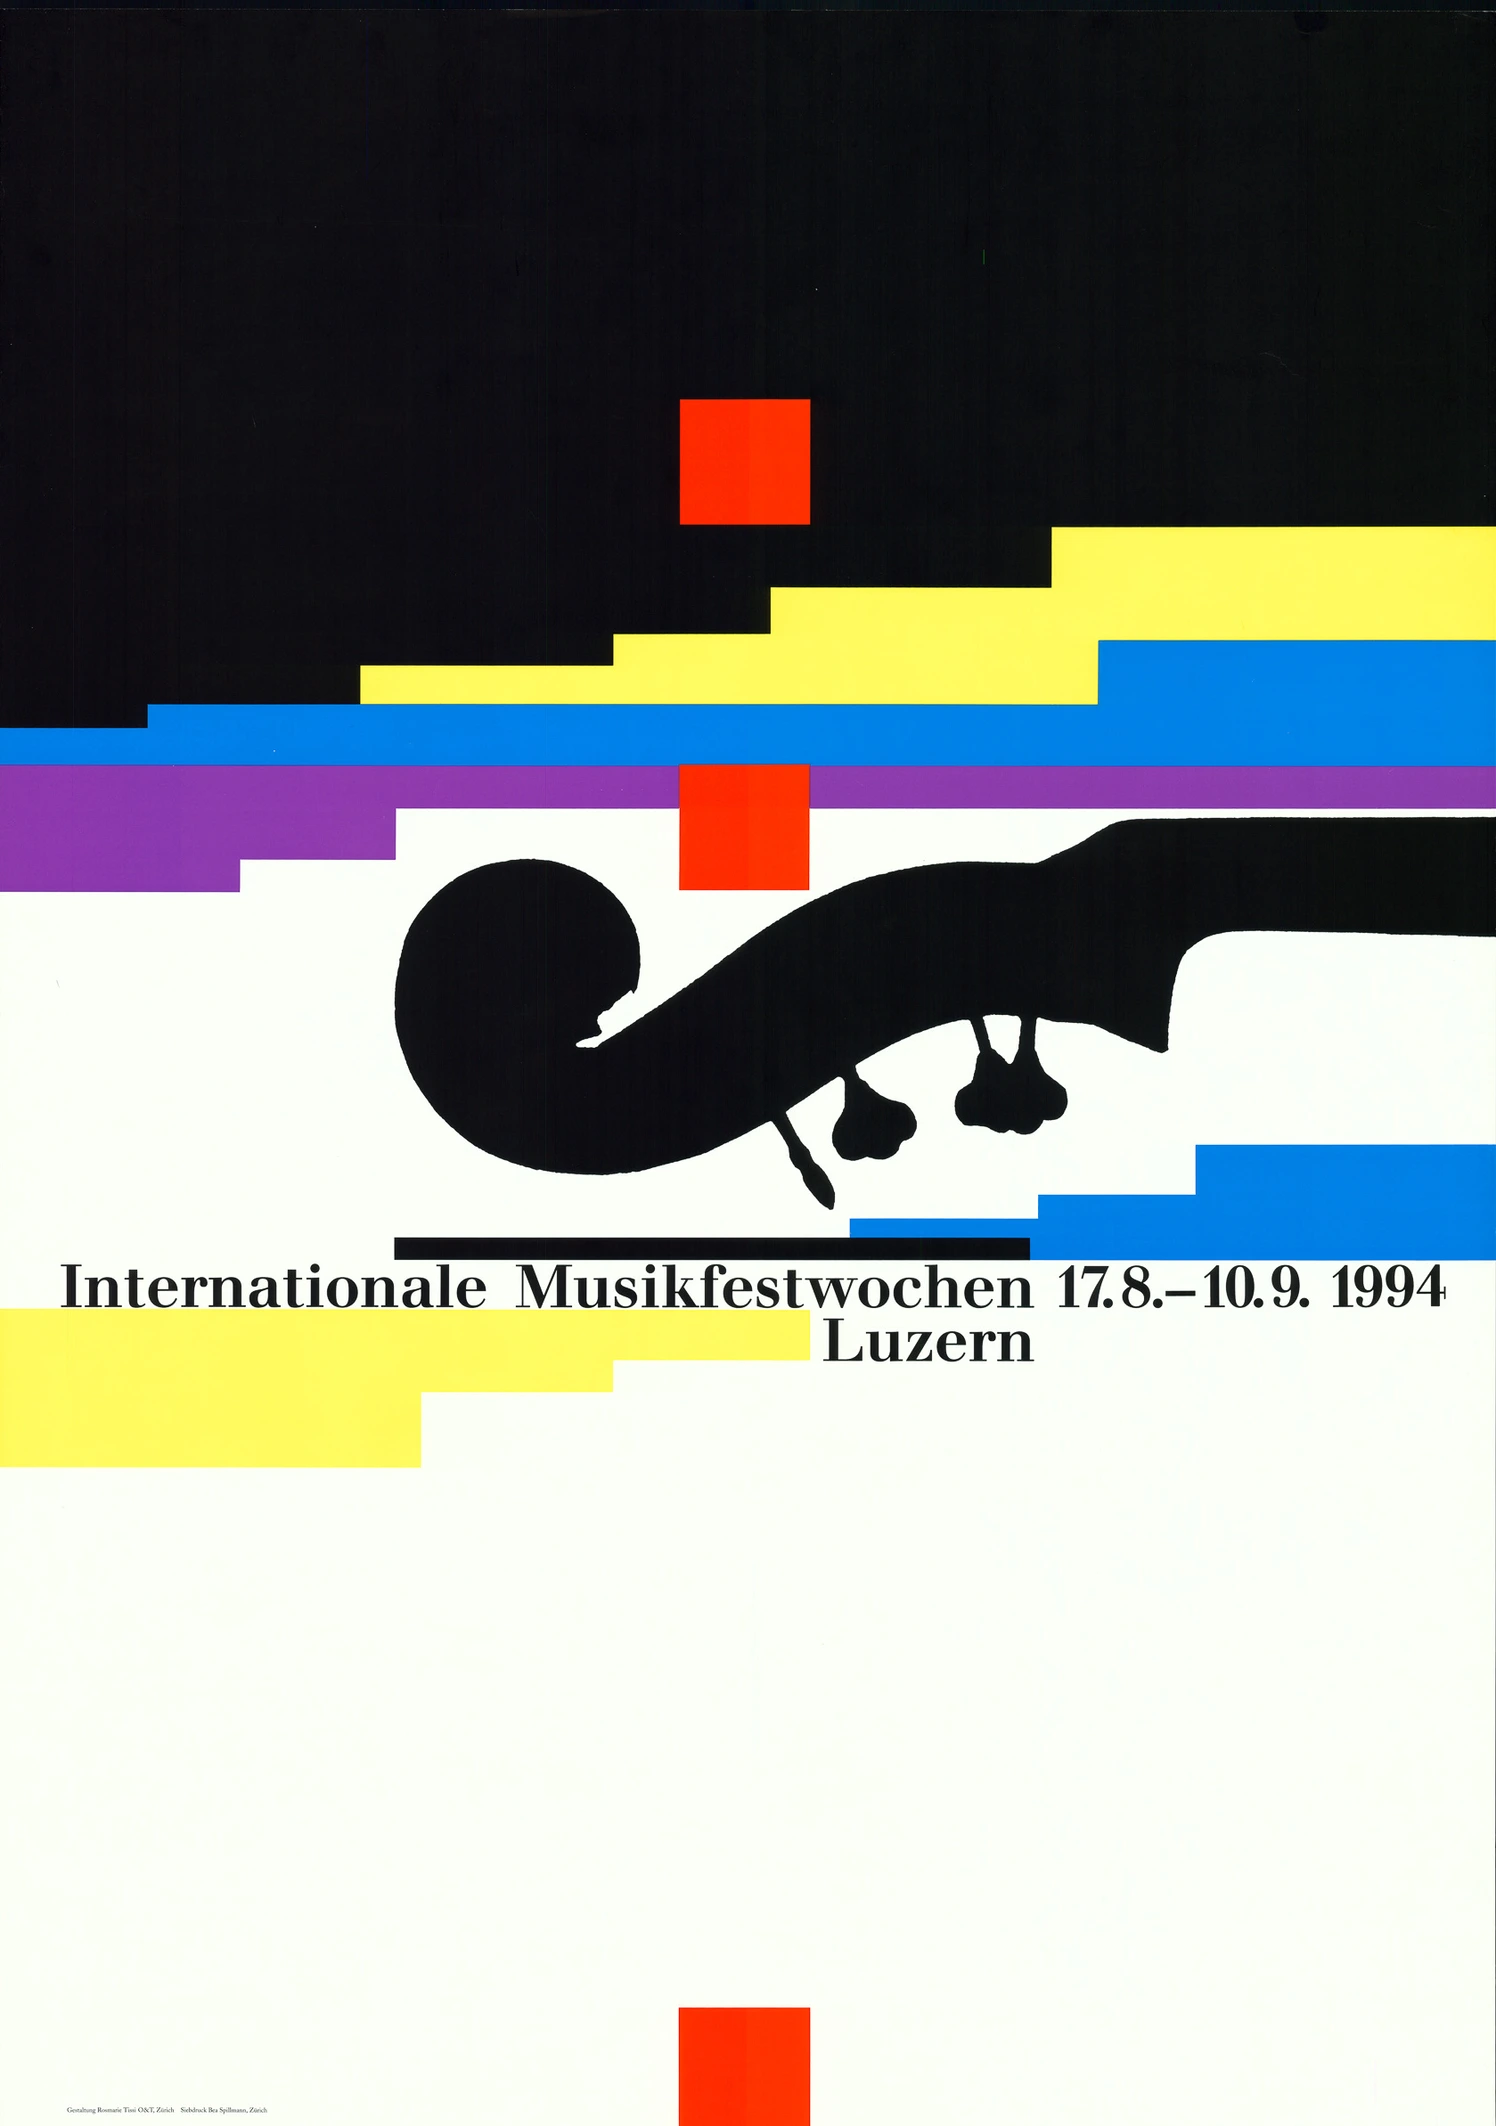 Poster for the International Musik Festival in Lucerne. Violin pegbox with pixelated stains of color